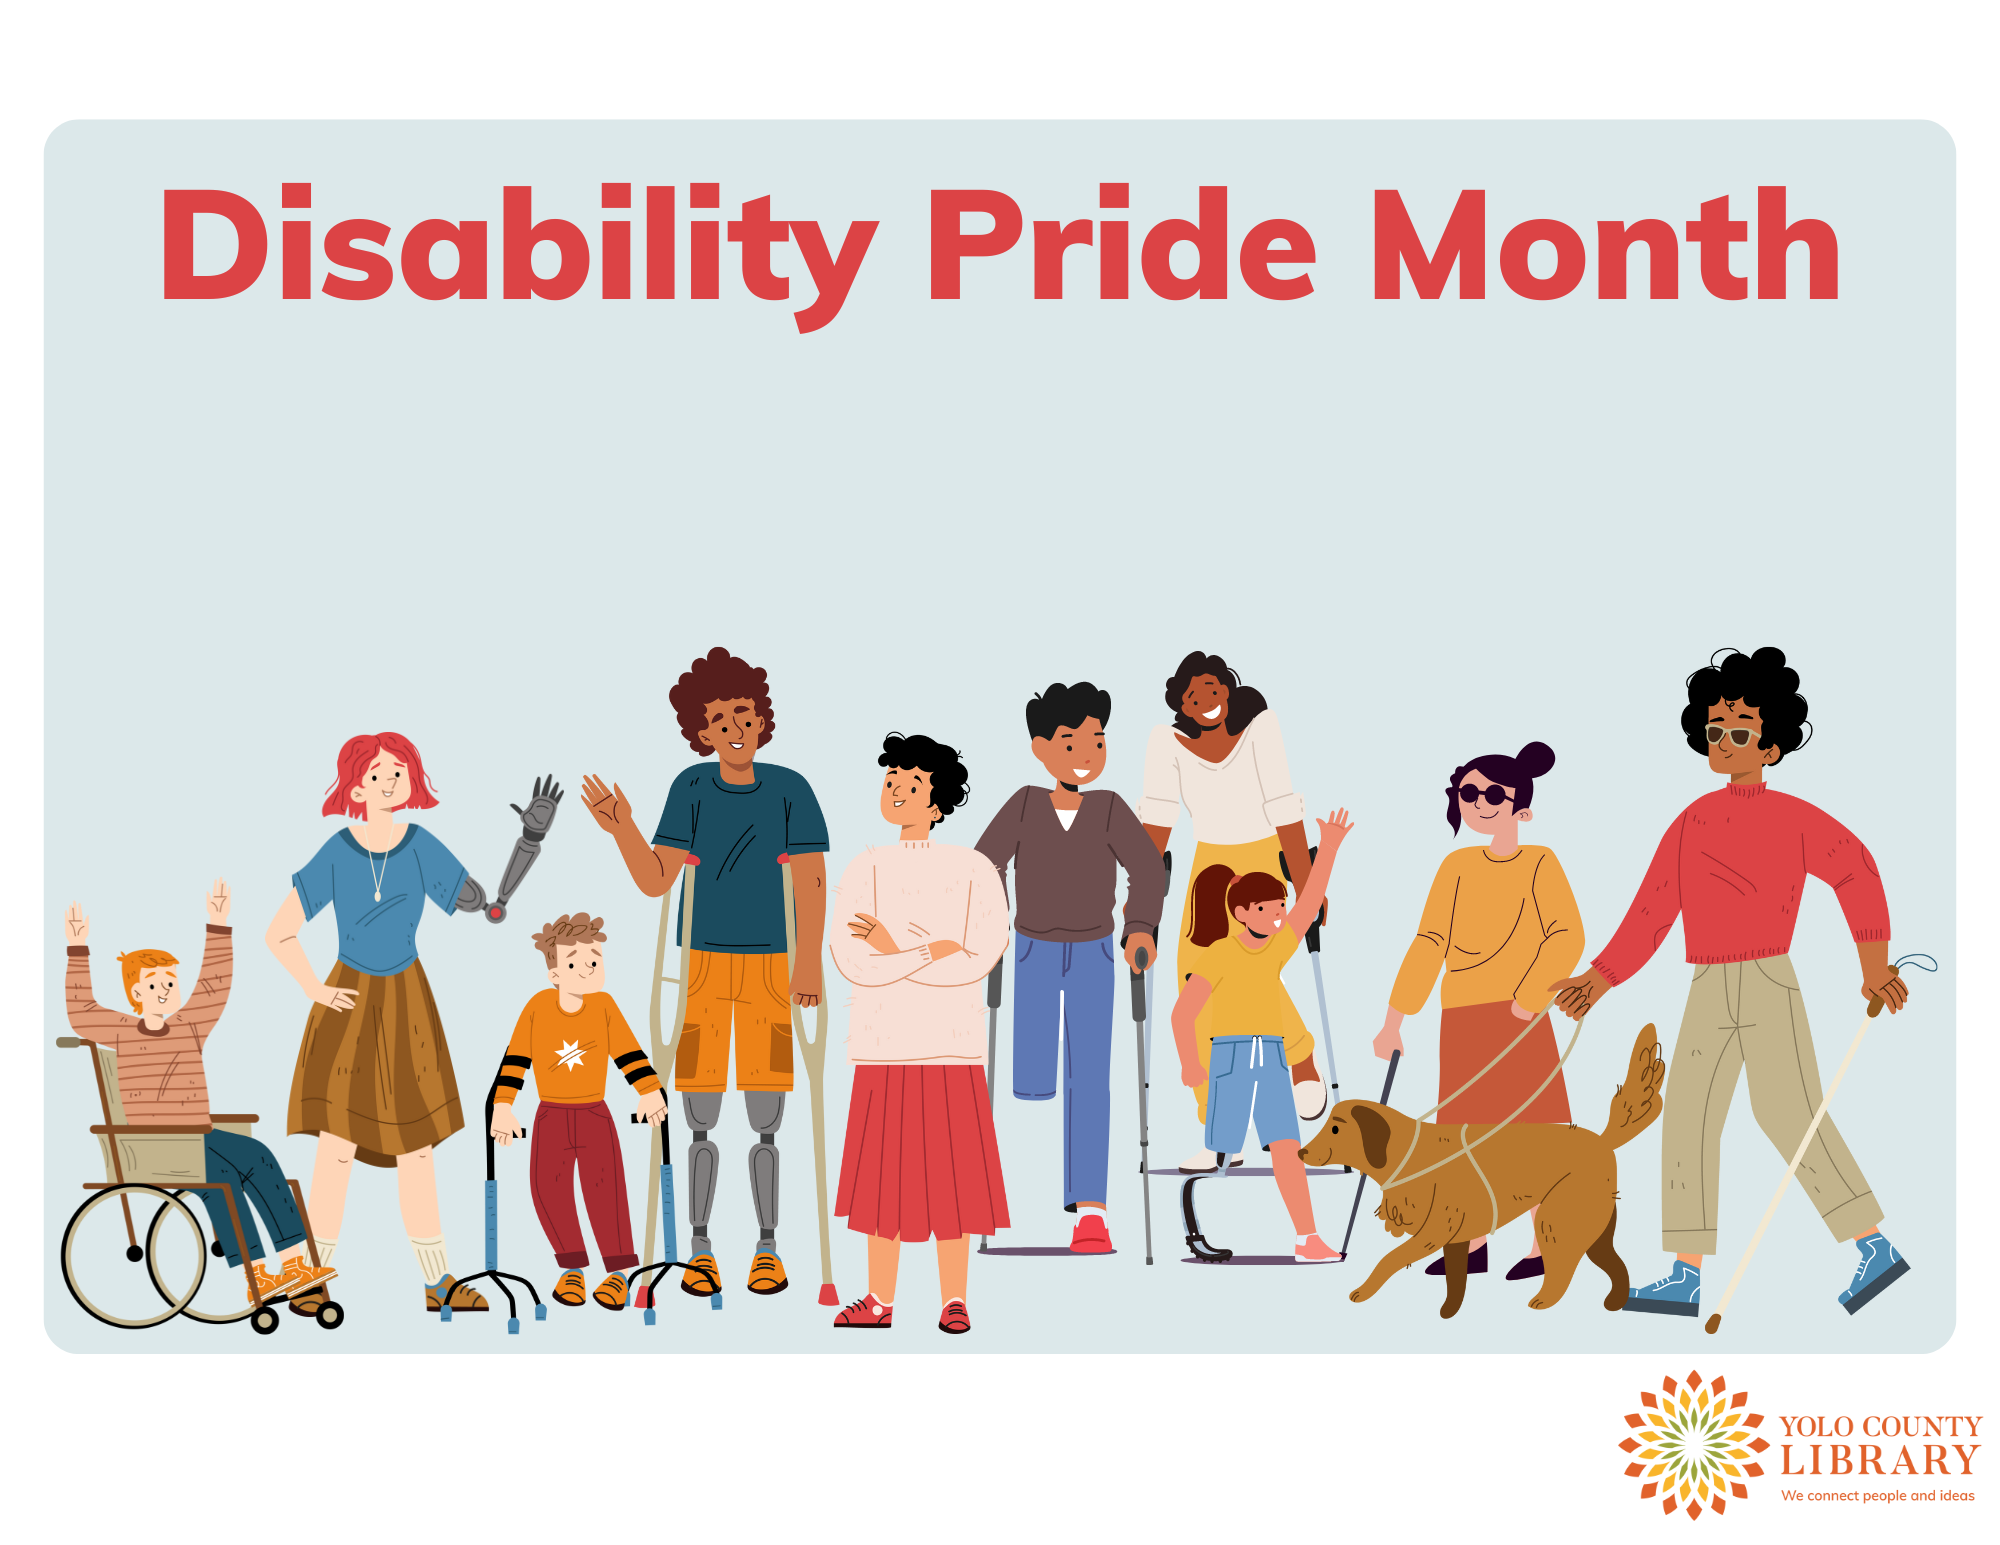 Disability Pride Month. Graphic of many people with different abilities and different ethnicities. There is a wheelchair user, a person with a seeing eye dog, and people using prosthetics. Yolo County Library logo.